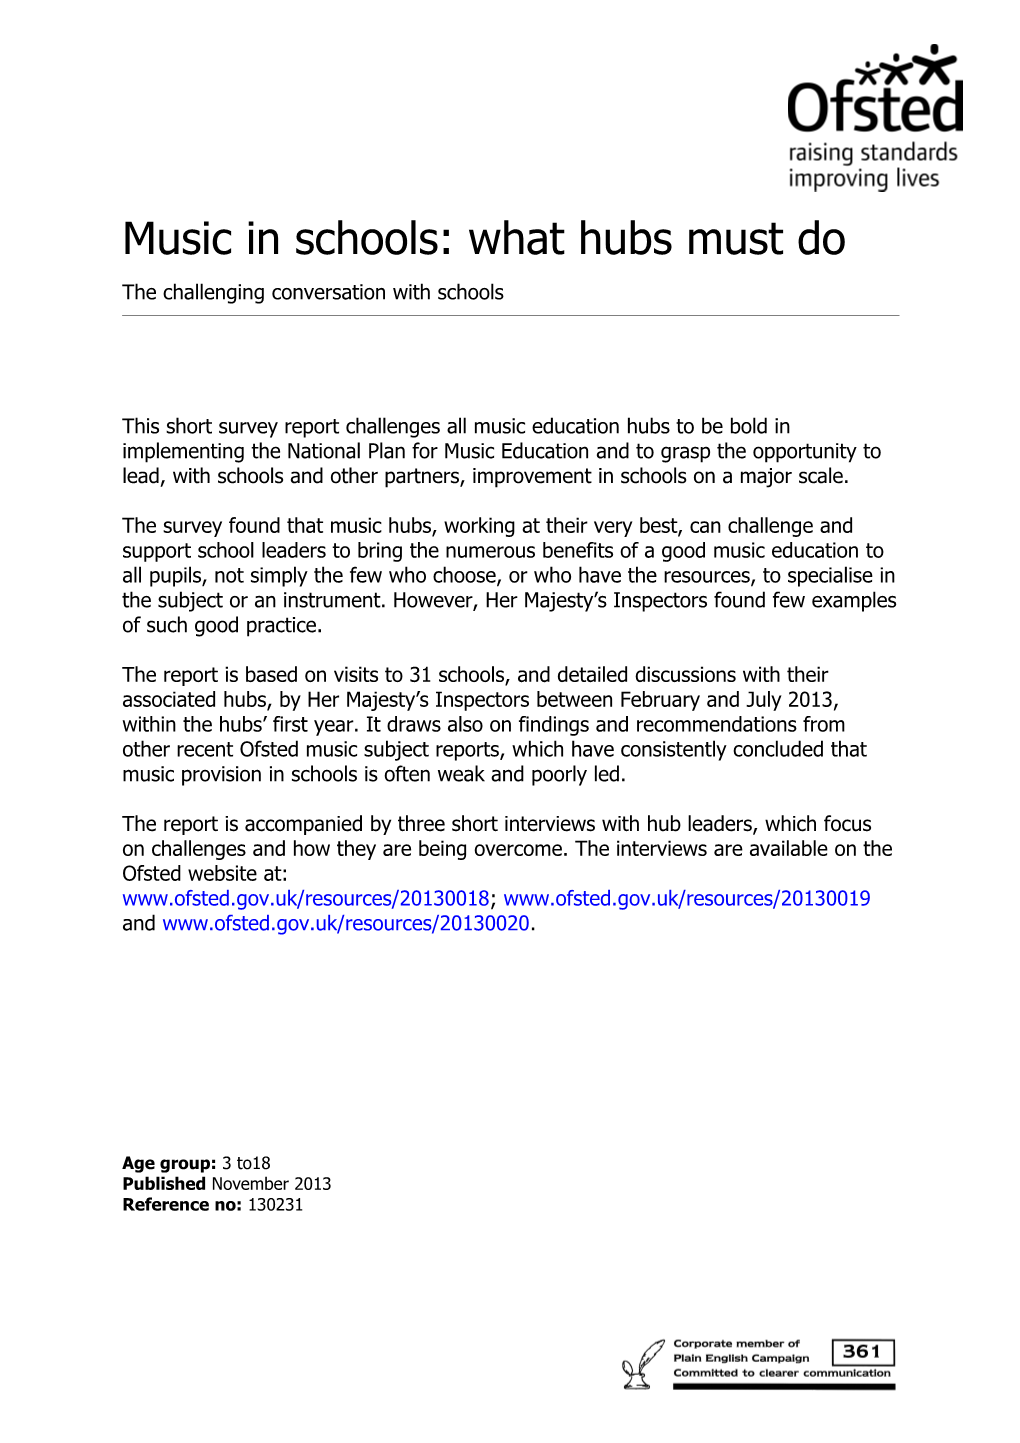 Music in Schools: What Hubs Must Do